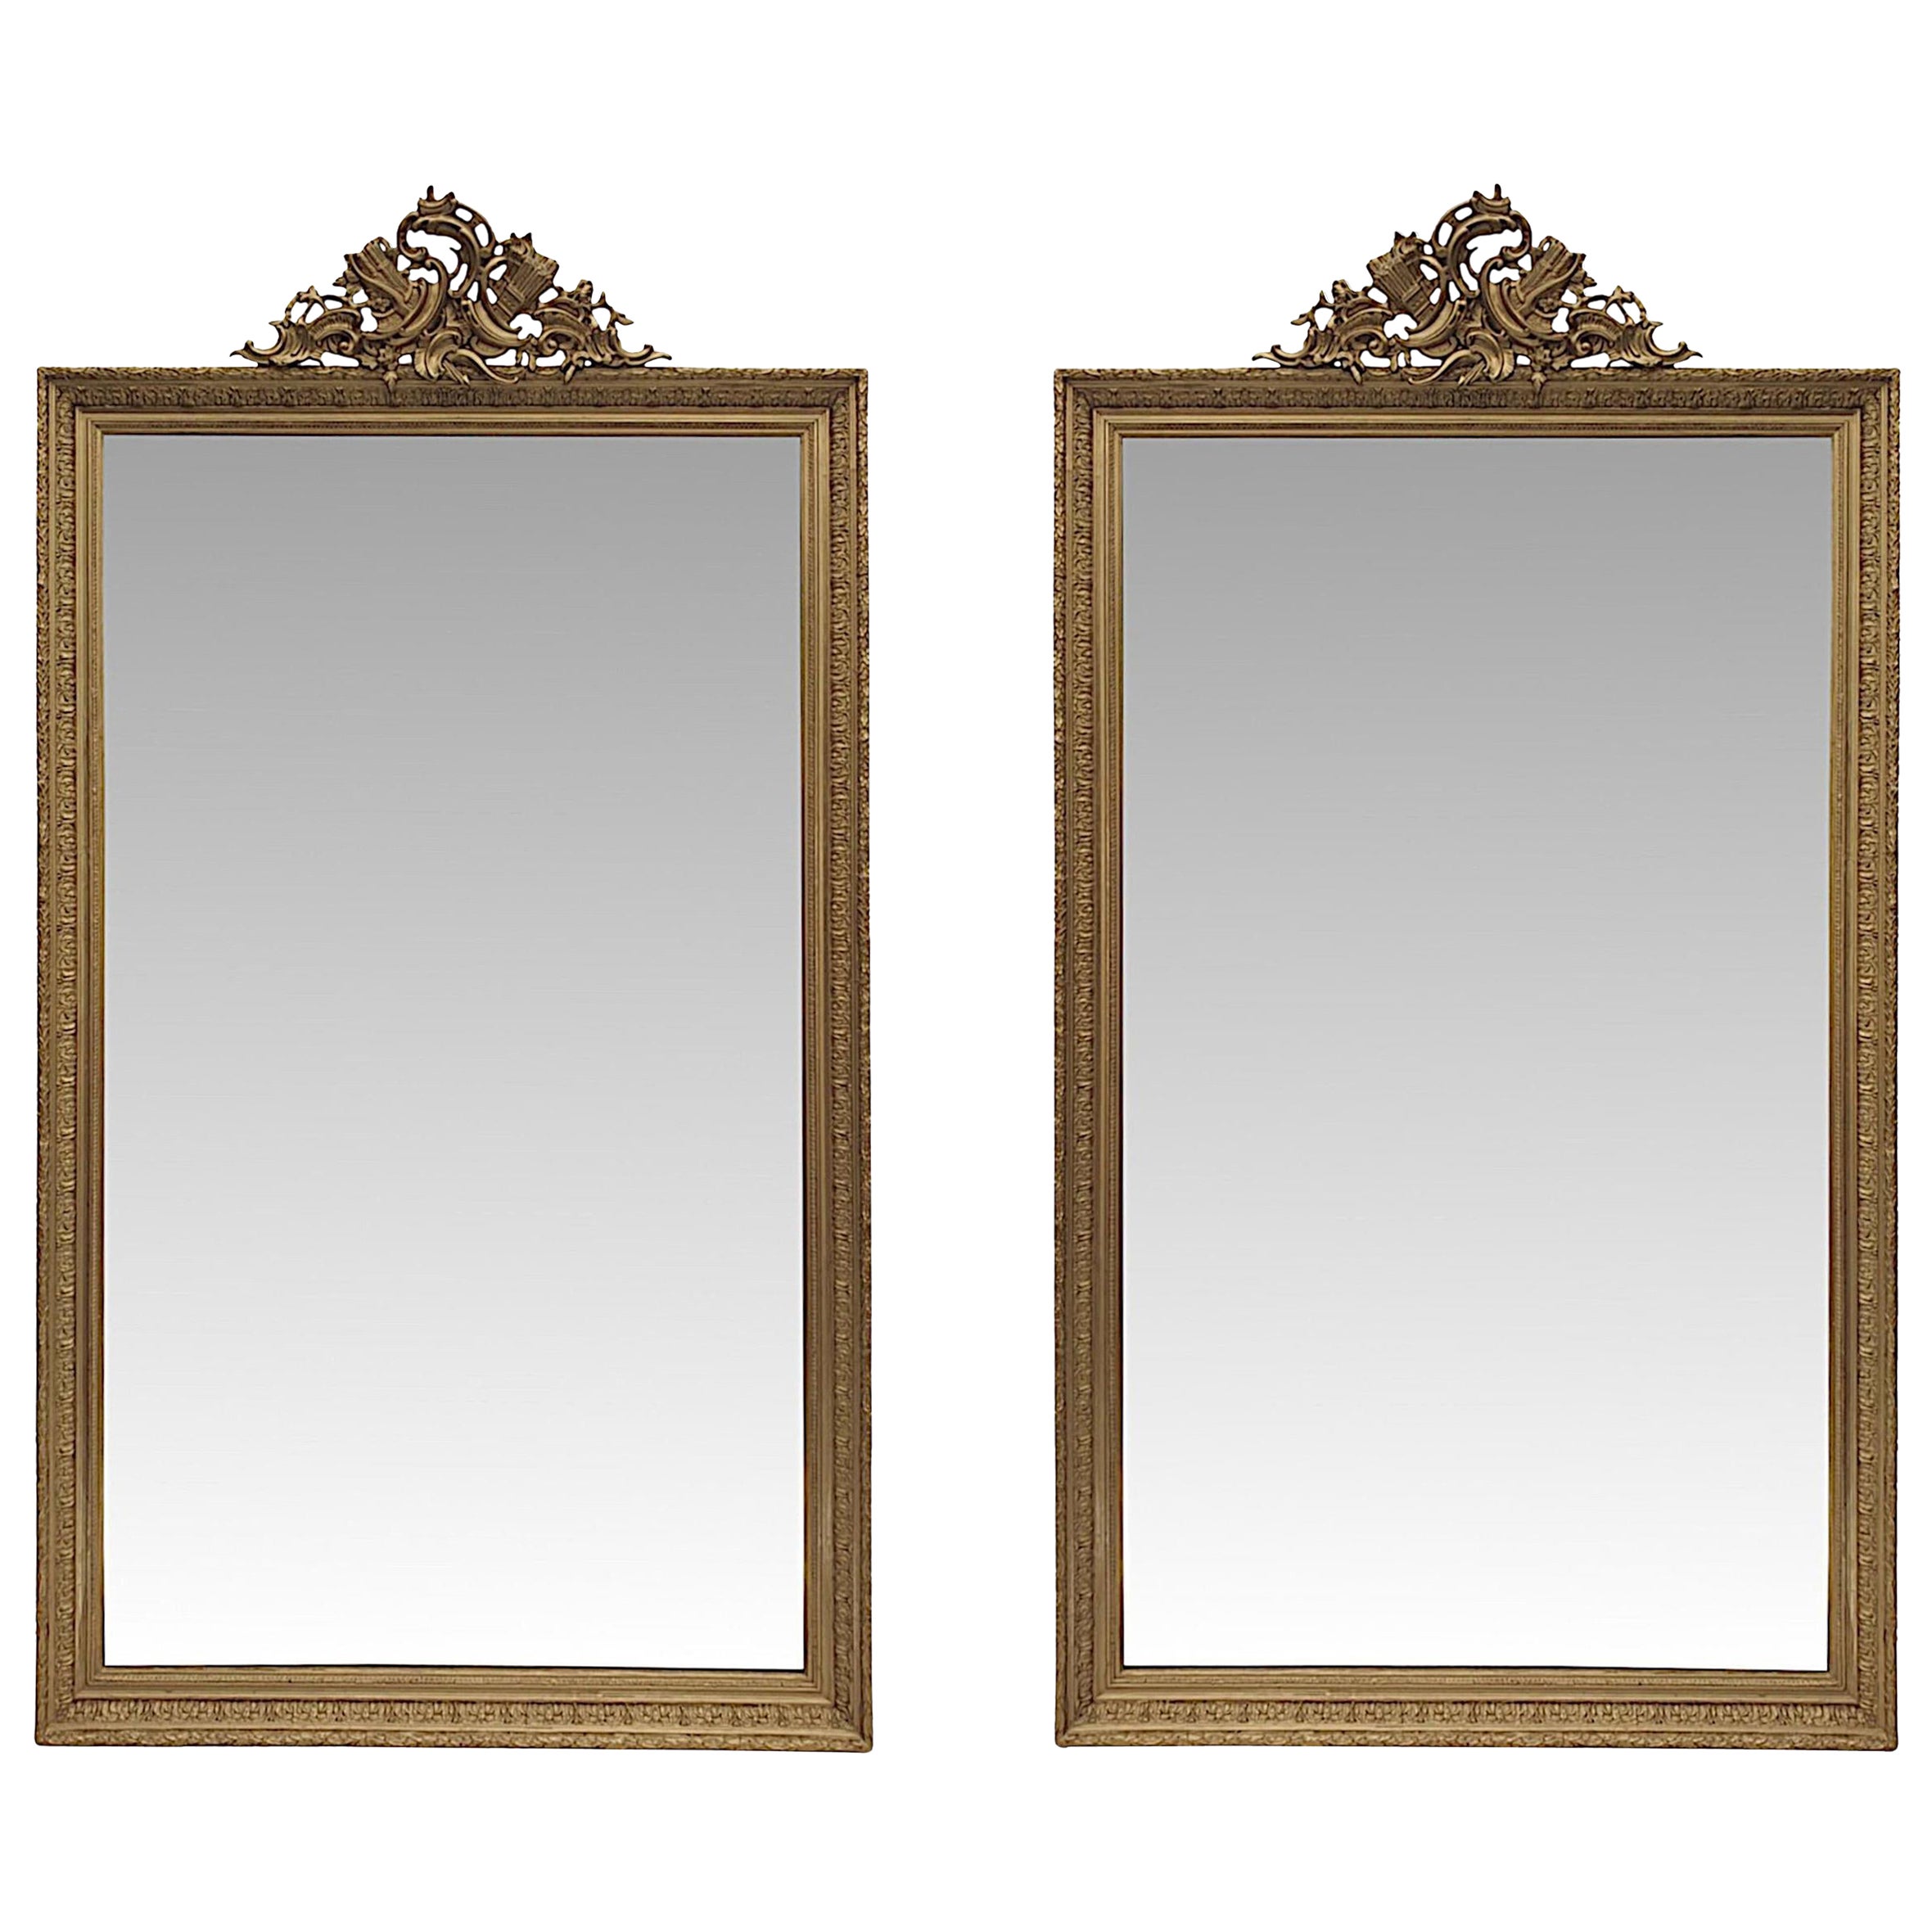 Very Rare and Fine Pair of 19th Century Overmantle or Leaner Mirrors For Sale